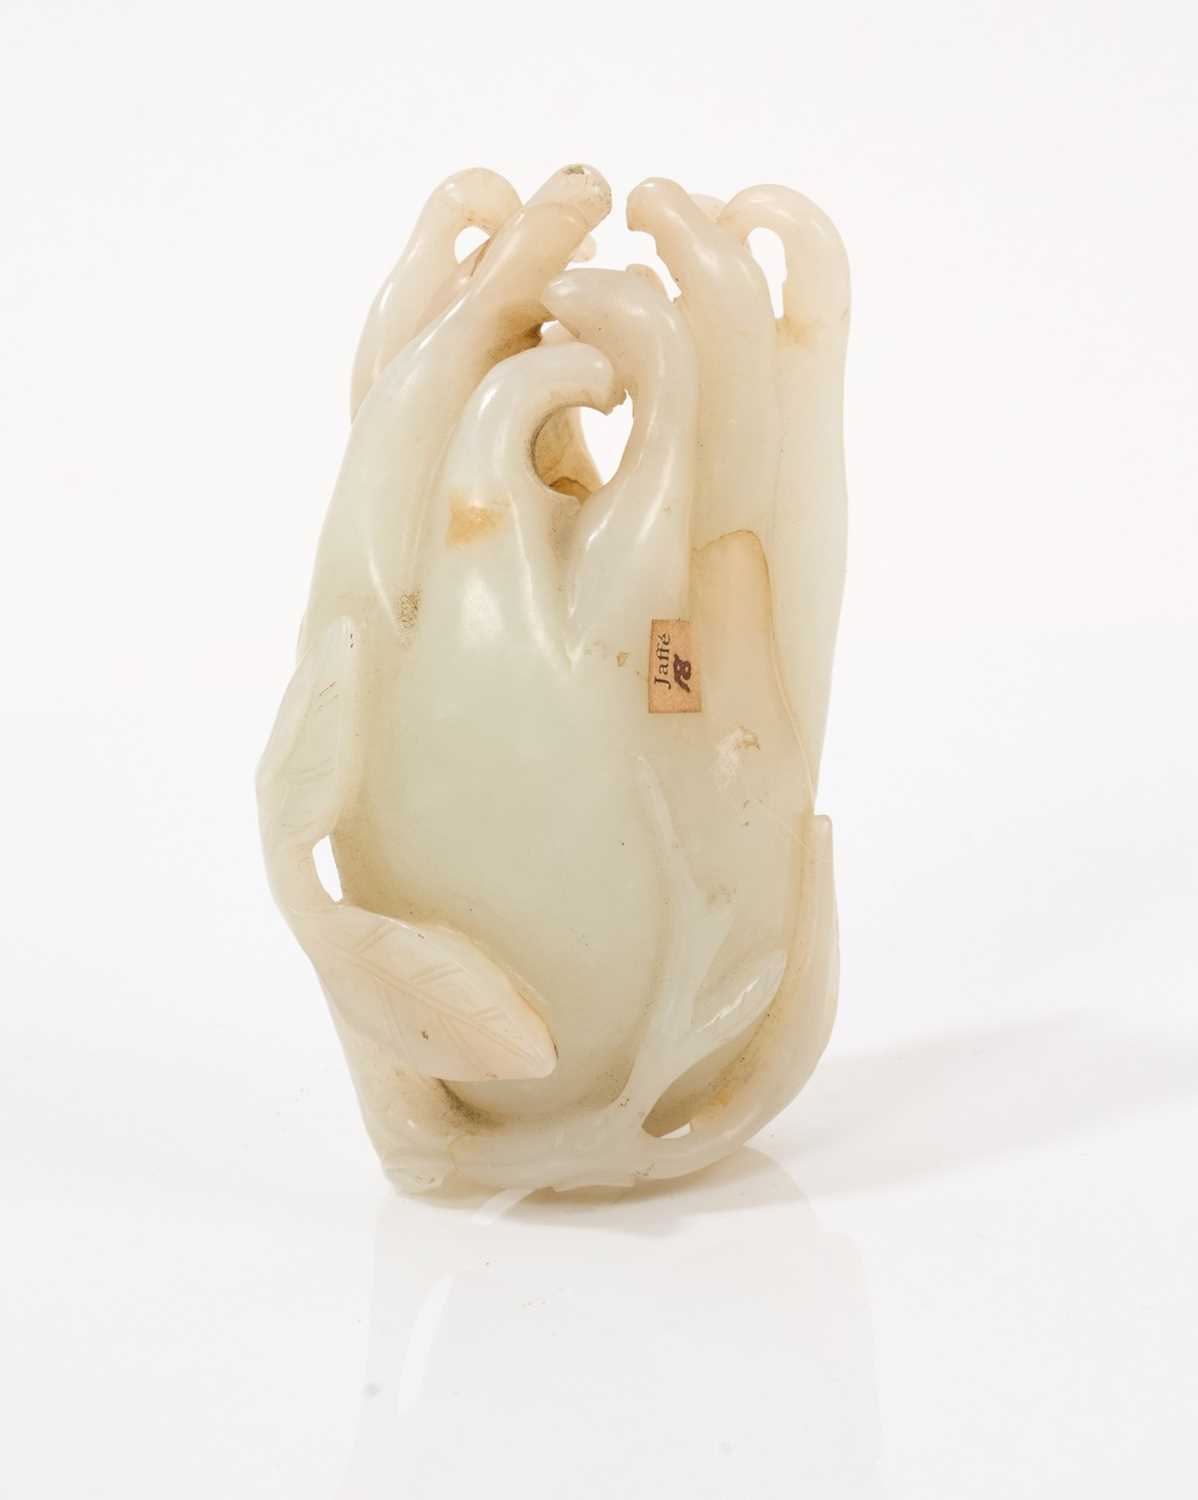 18th / 19th century celadon jade snuff bottle in the form of a Buddha's hand - Image 2 of 8